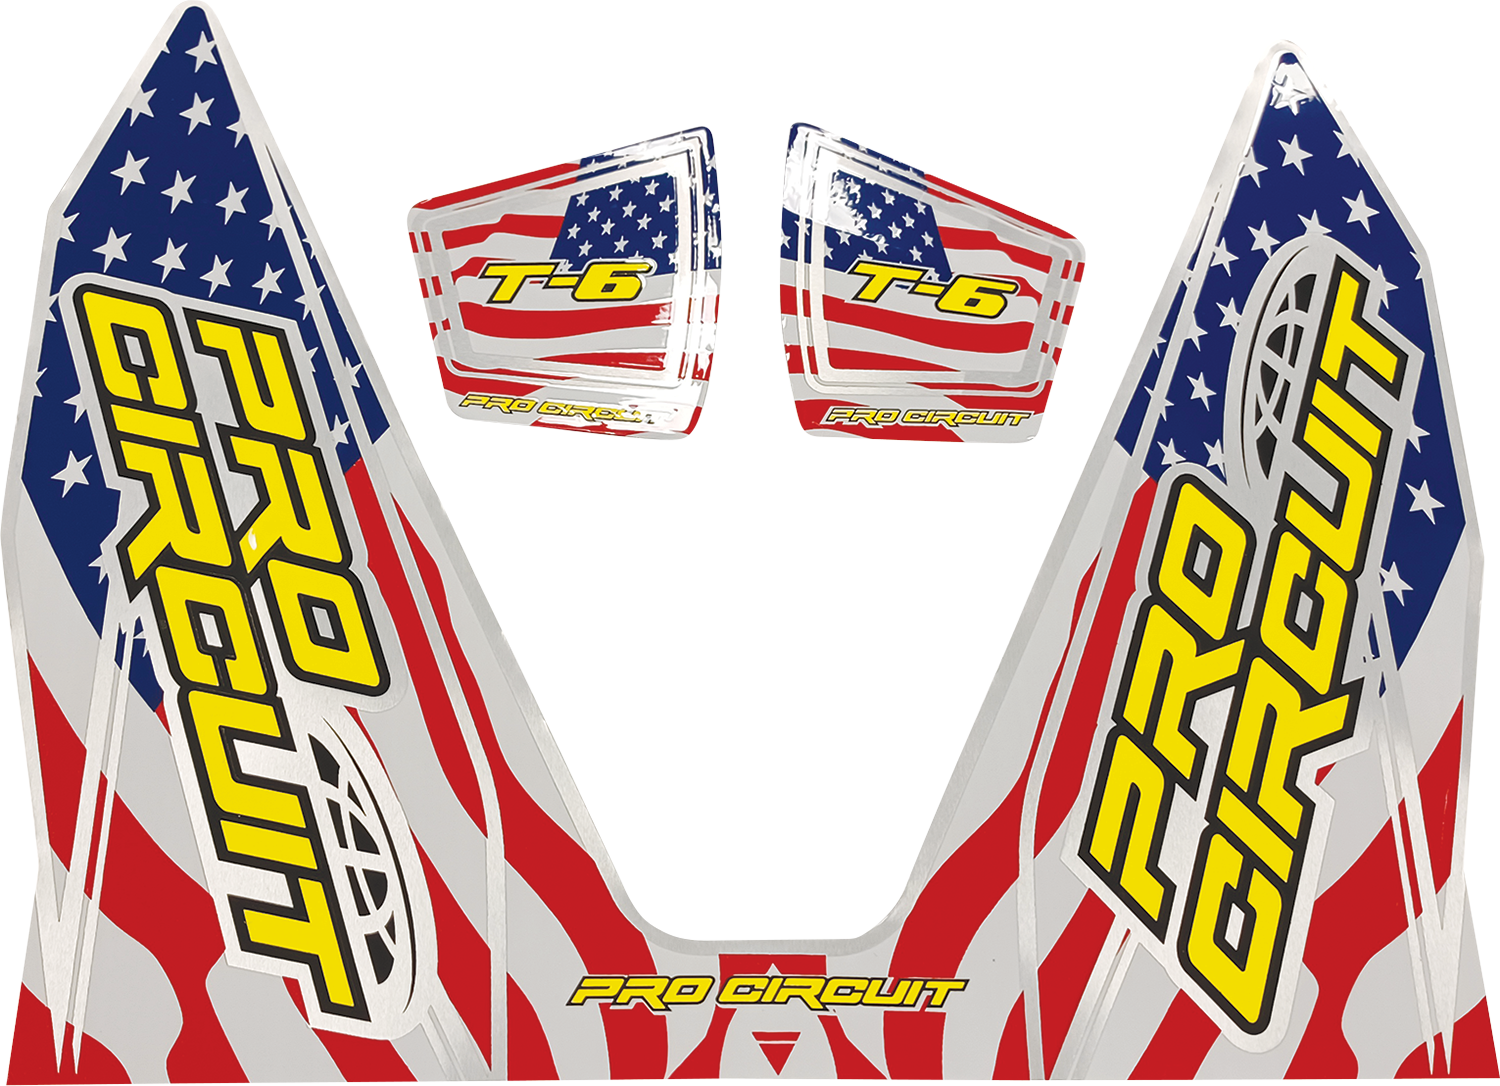 PRO CIRCUIT T-6 Decal - Stars and Stripes DC22T6-SS